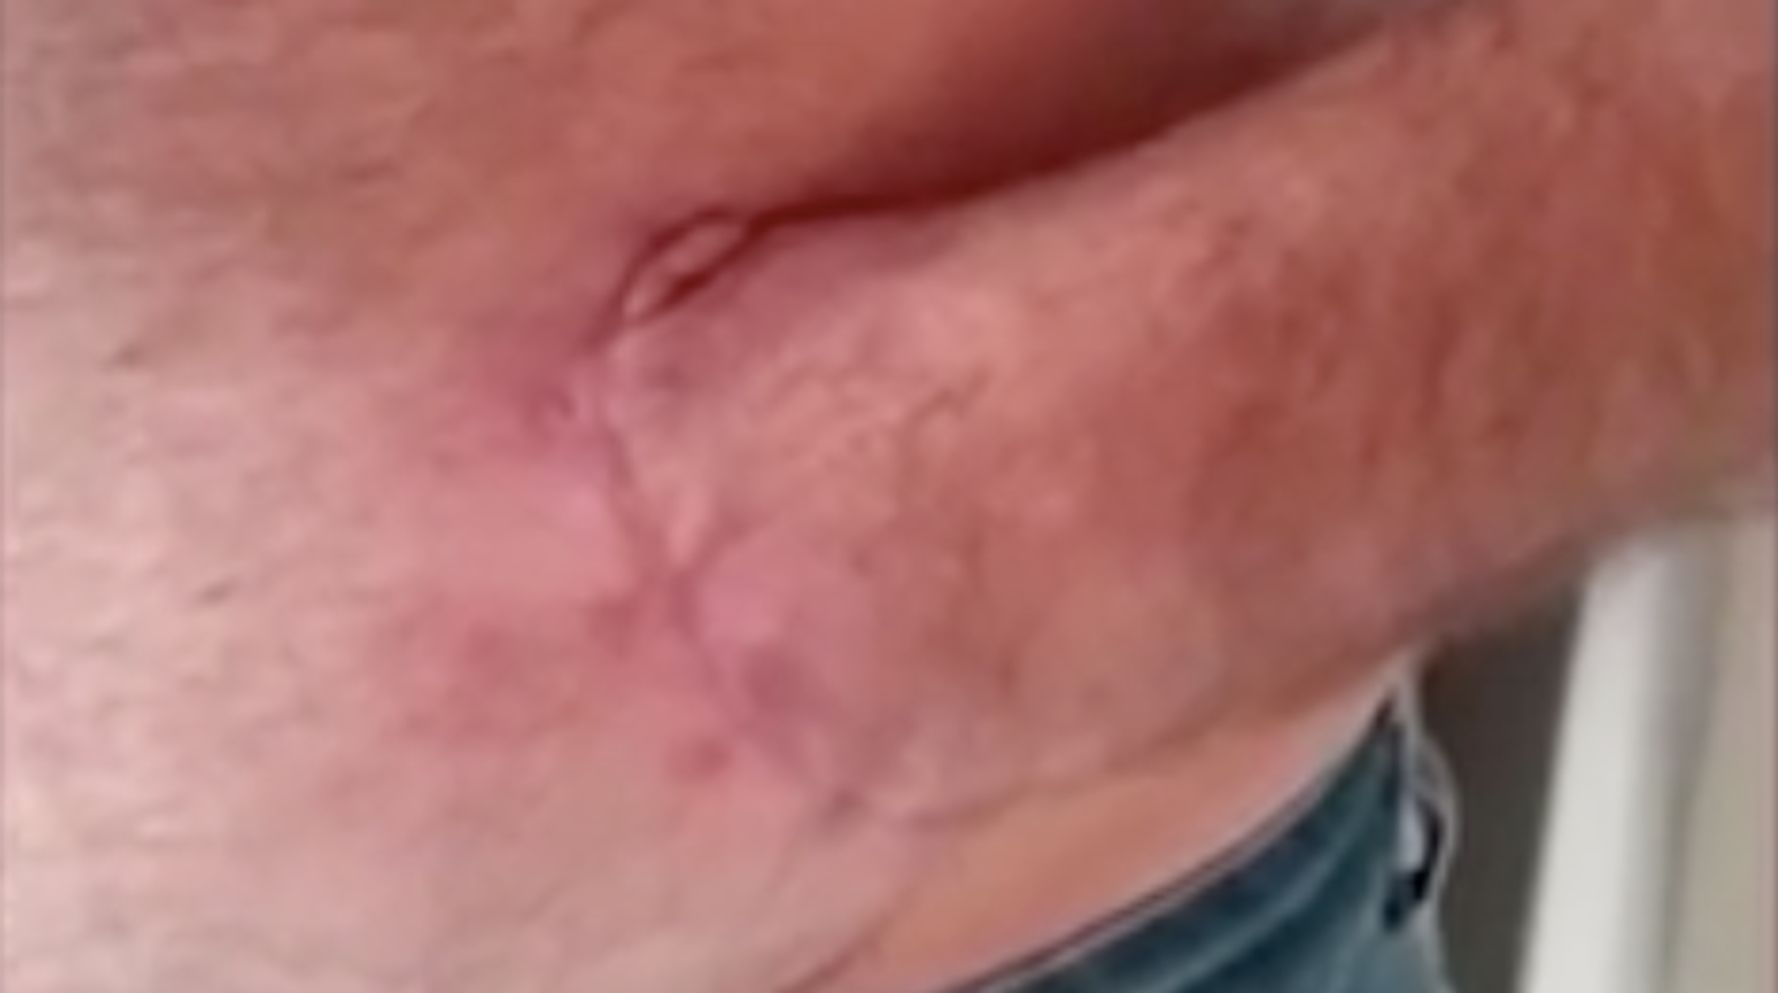 Man has hand sewn into his stomach to save it